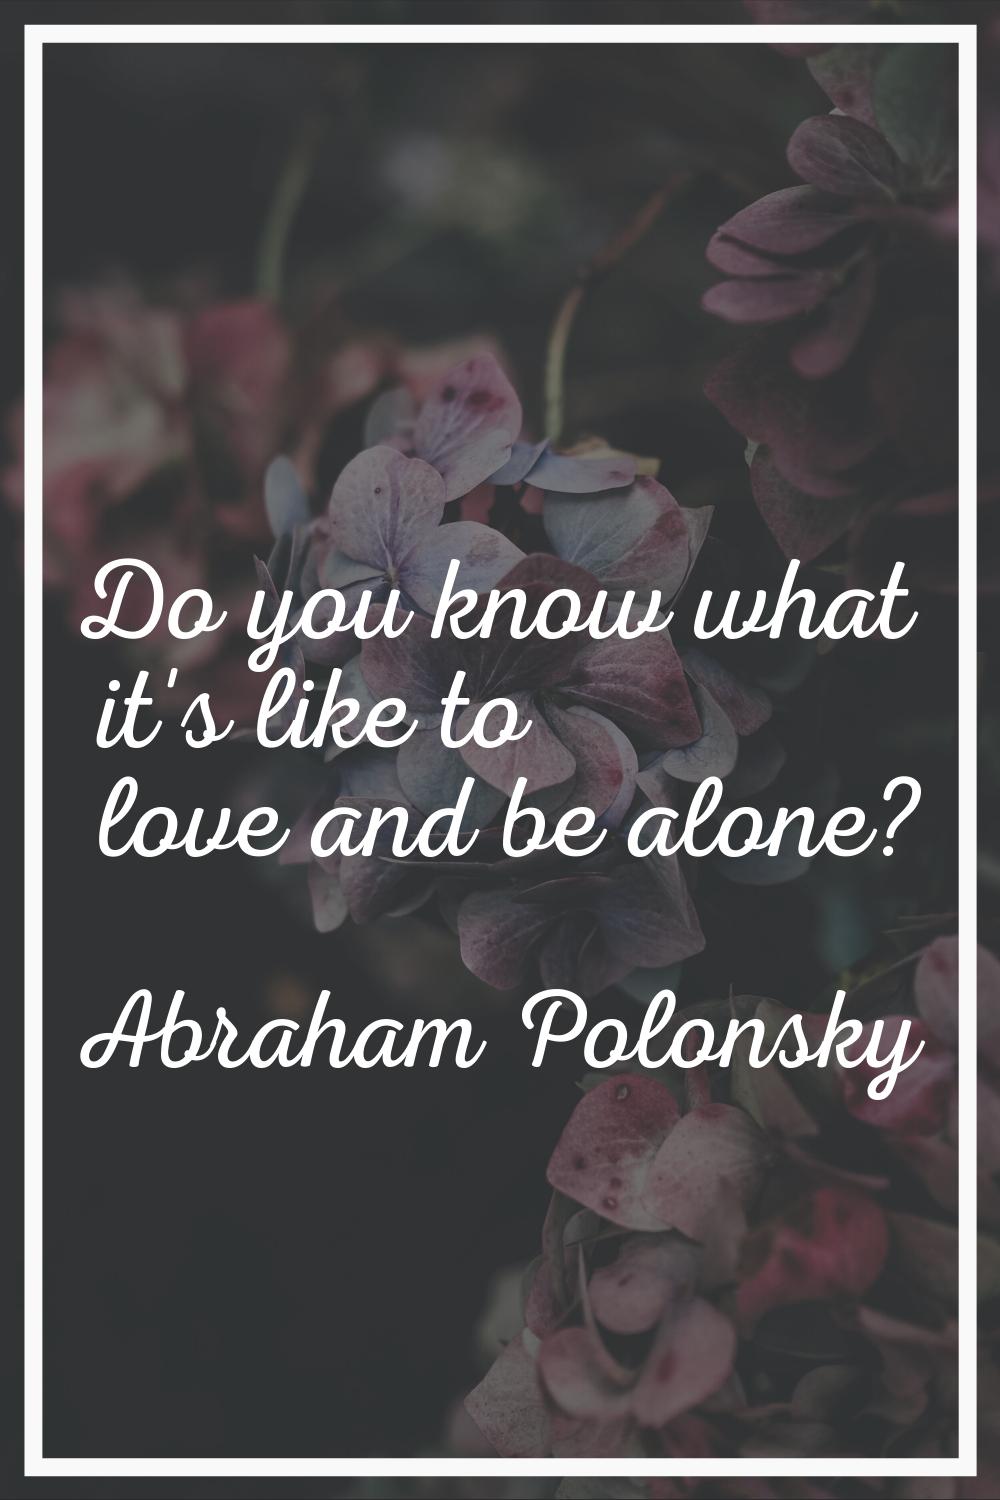 Do you know what it's like to love and be alone?